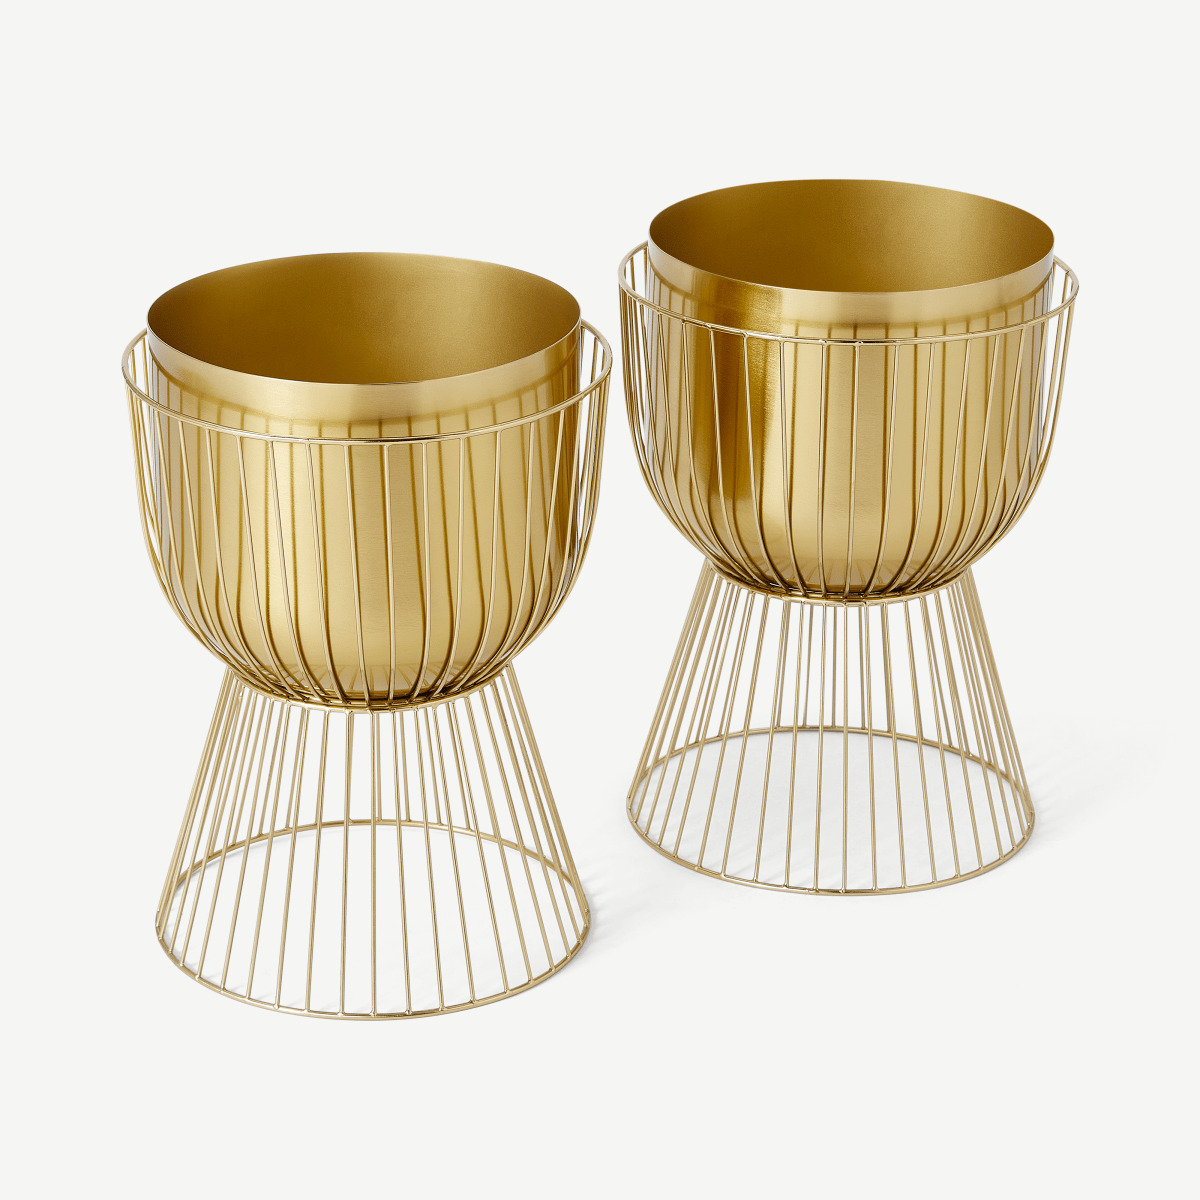 Carole Set of 2 Planters with Stands, Brass